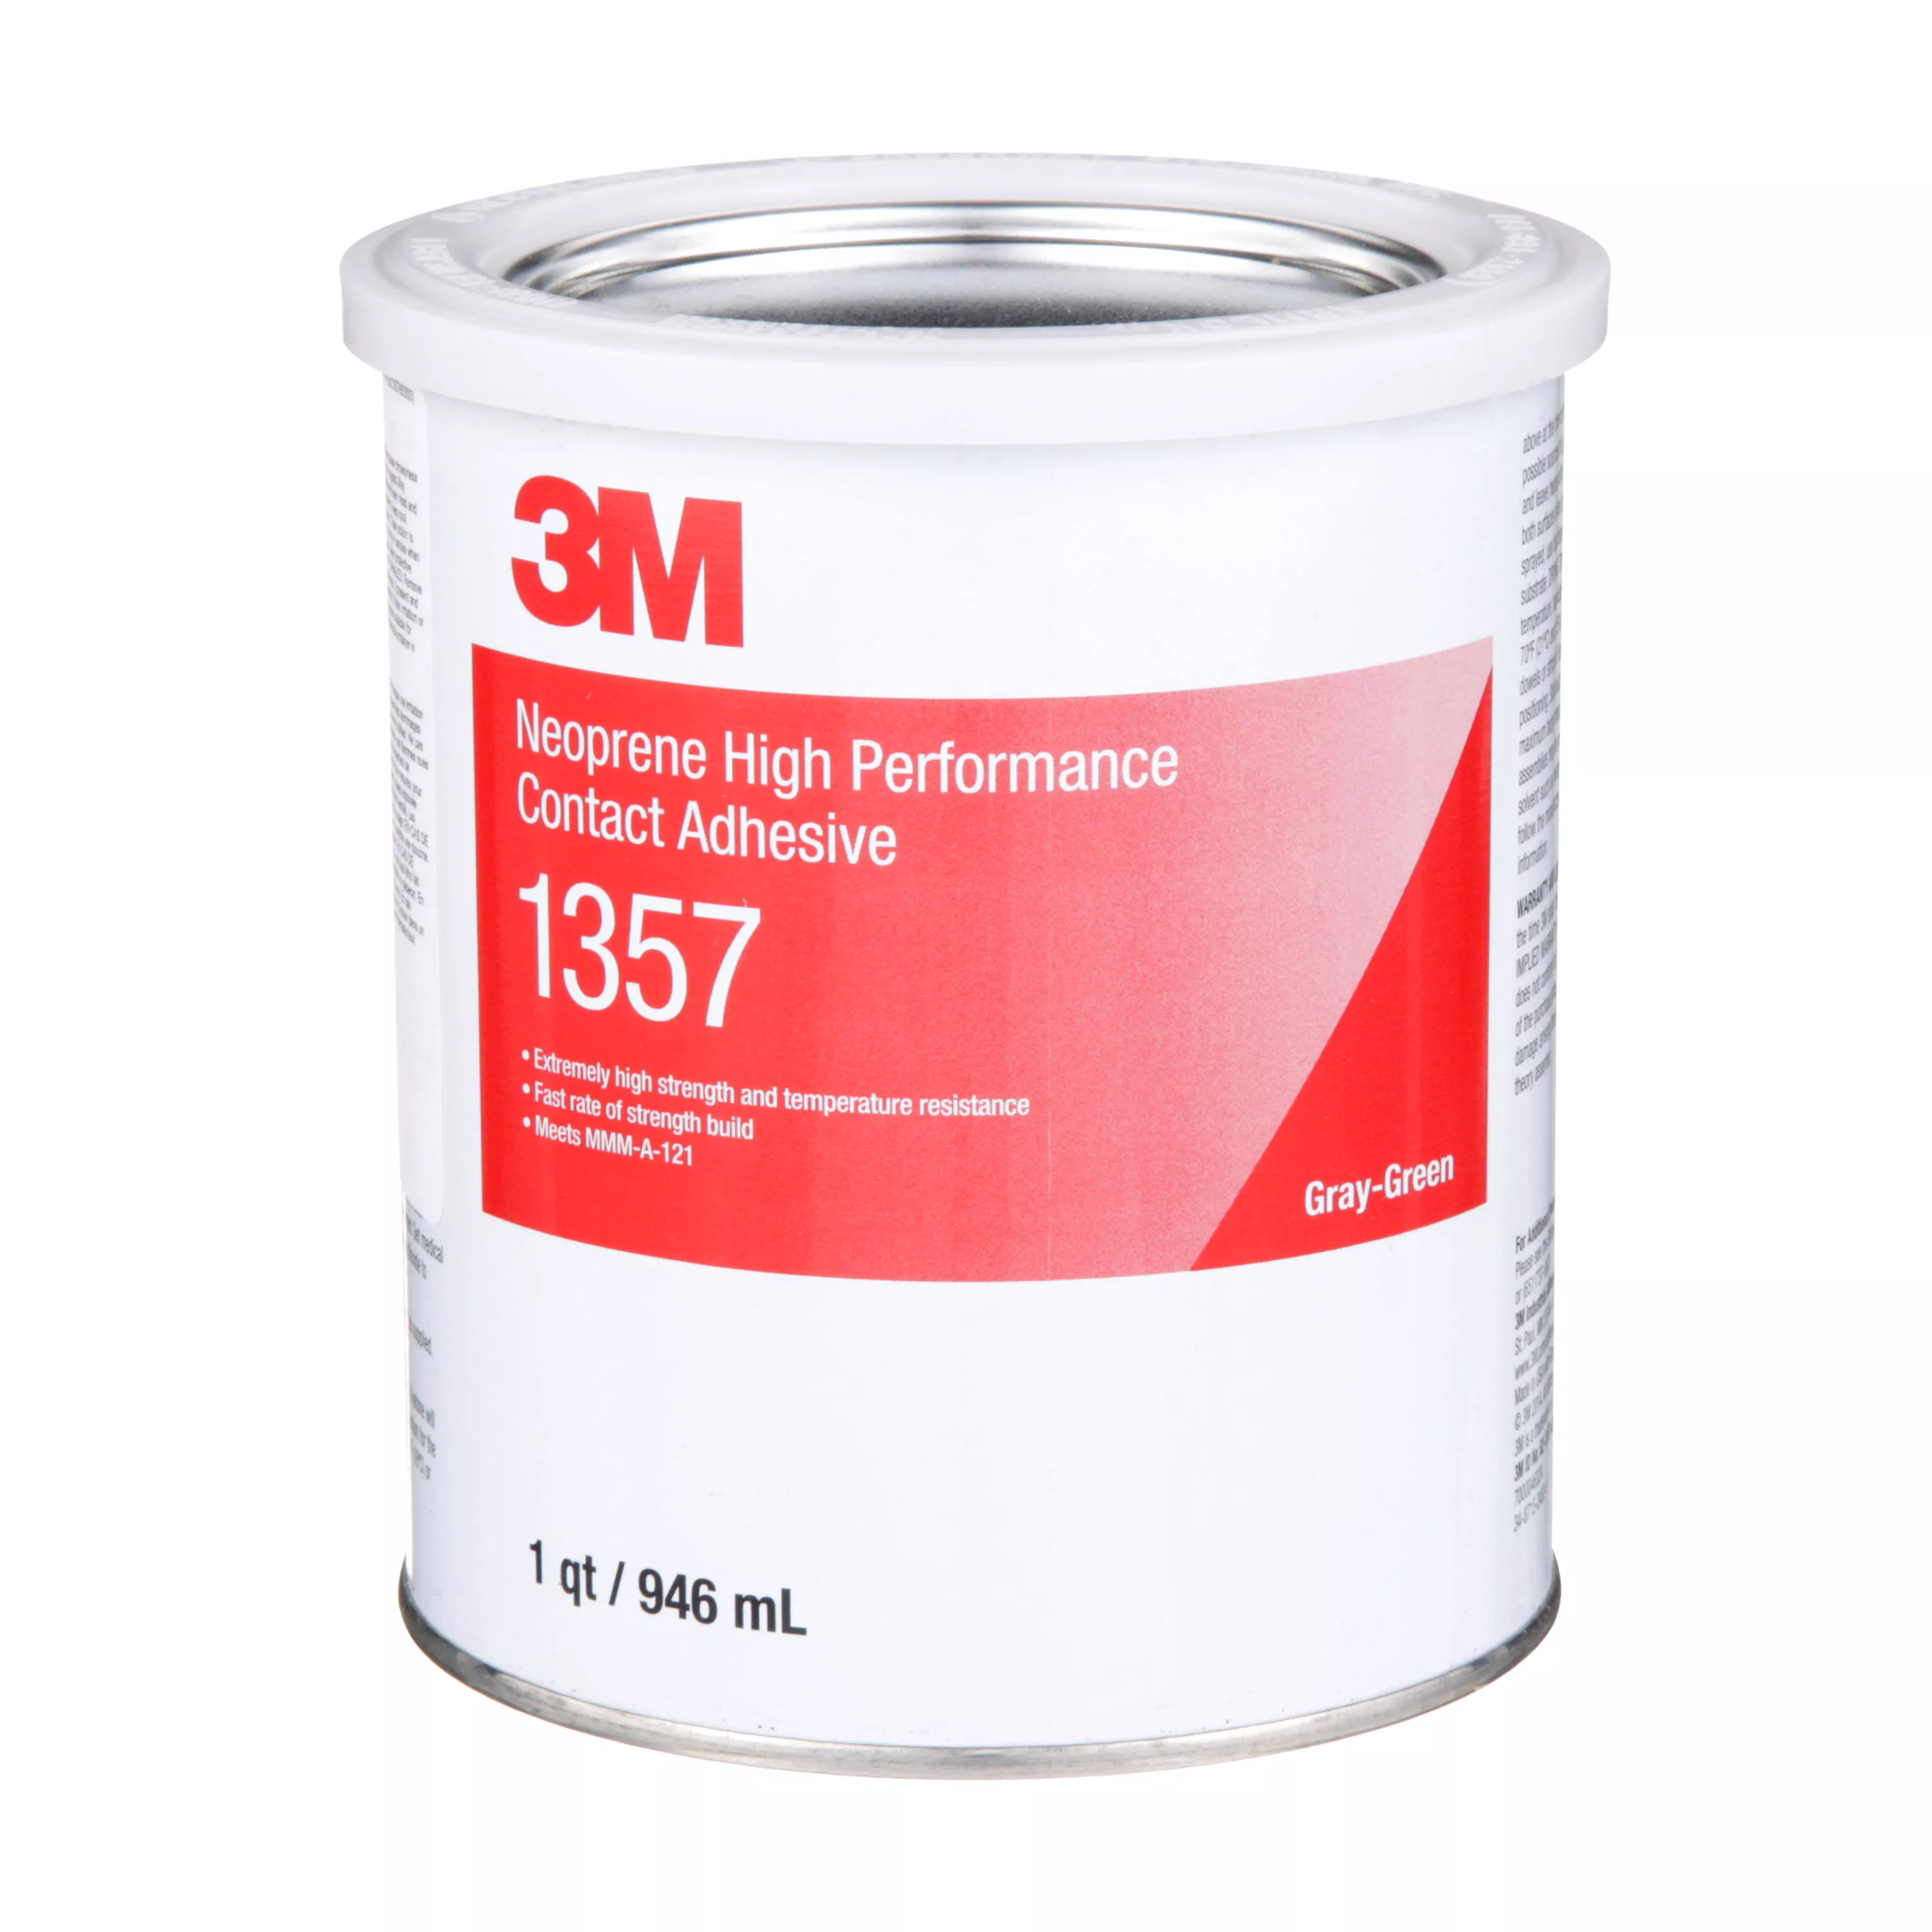 3M™ Neoprene High Performance Contact Adhesive 1357, Gray-Green, 1
Quart, 12 Can/Case